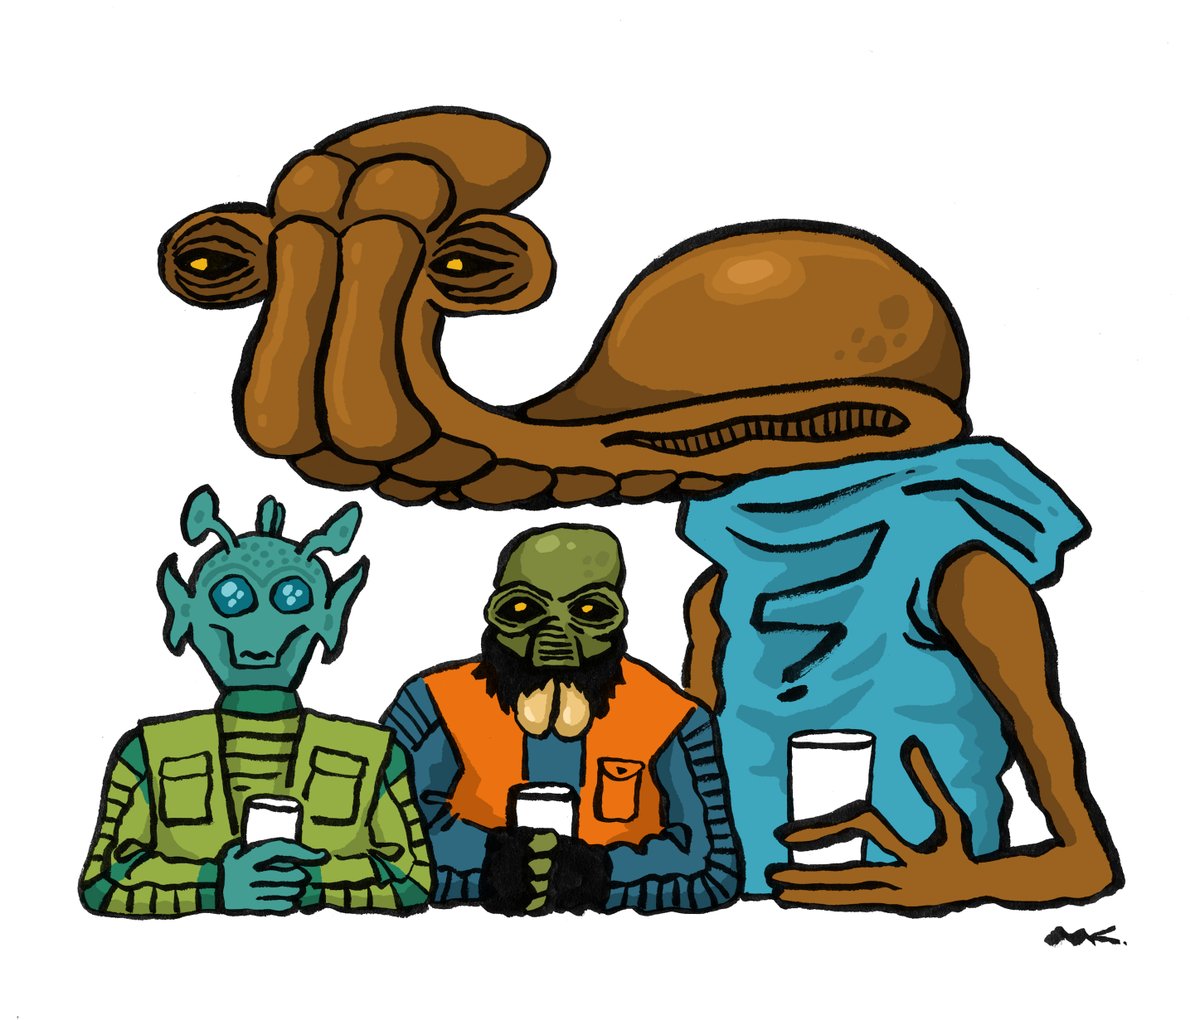 「Classic Cantina Aliens」|川原瑞丸のイラスト